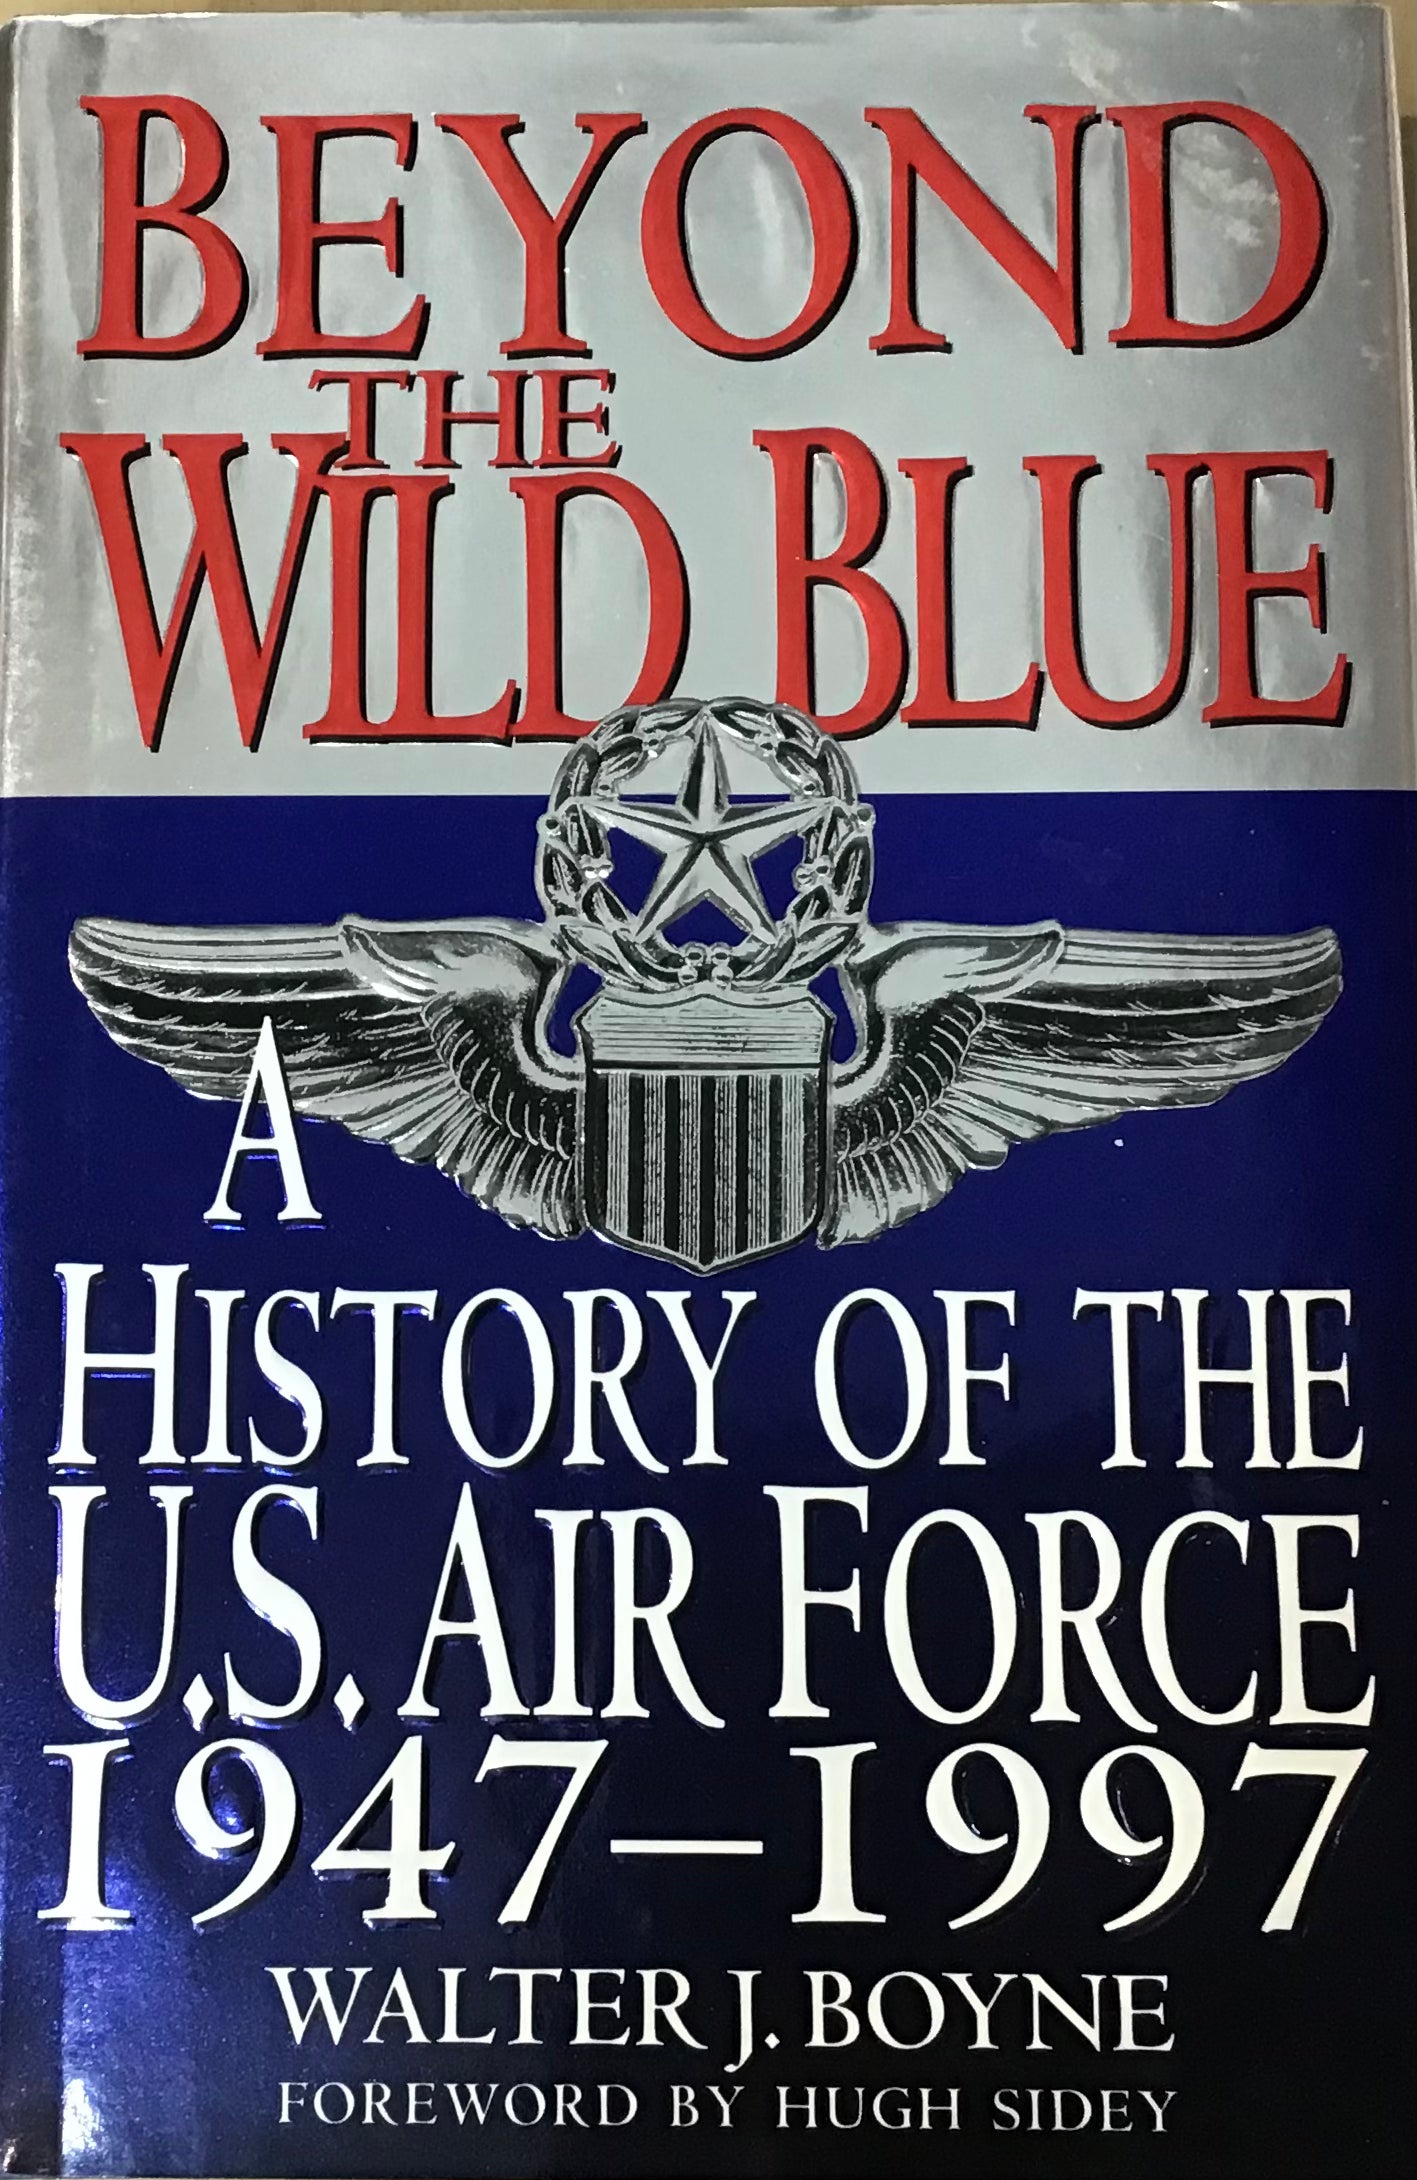 Beyond The Wild Blue: A History of the U.S. Air Force 1947-1997 by Walter J. Boyne - Chester Model Centre